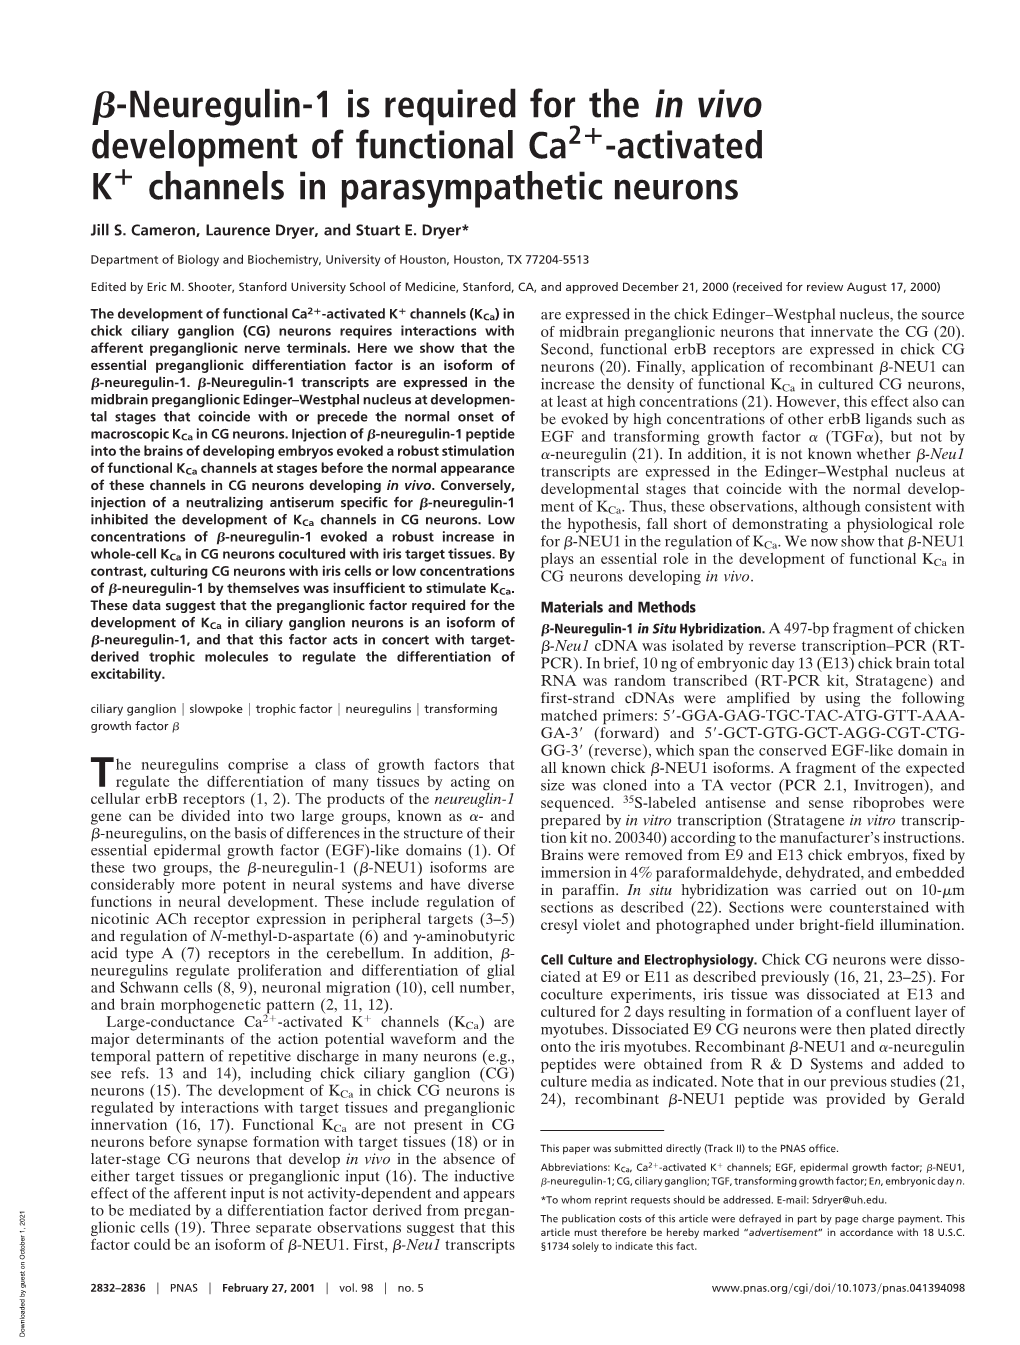 Activated K Channels in Parasympathetic Neurons